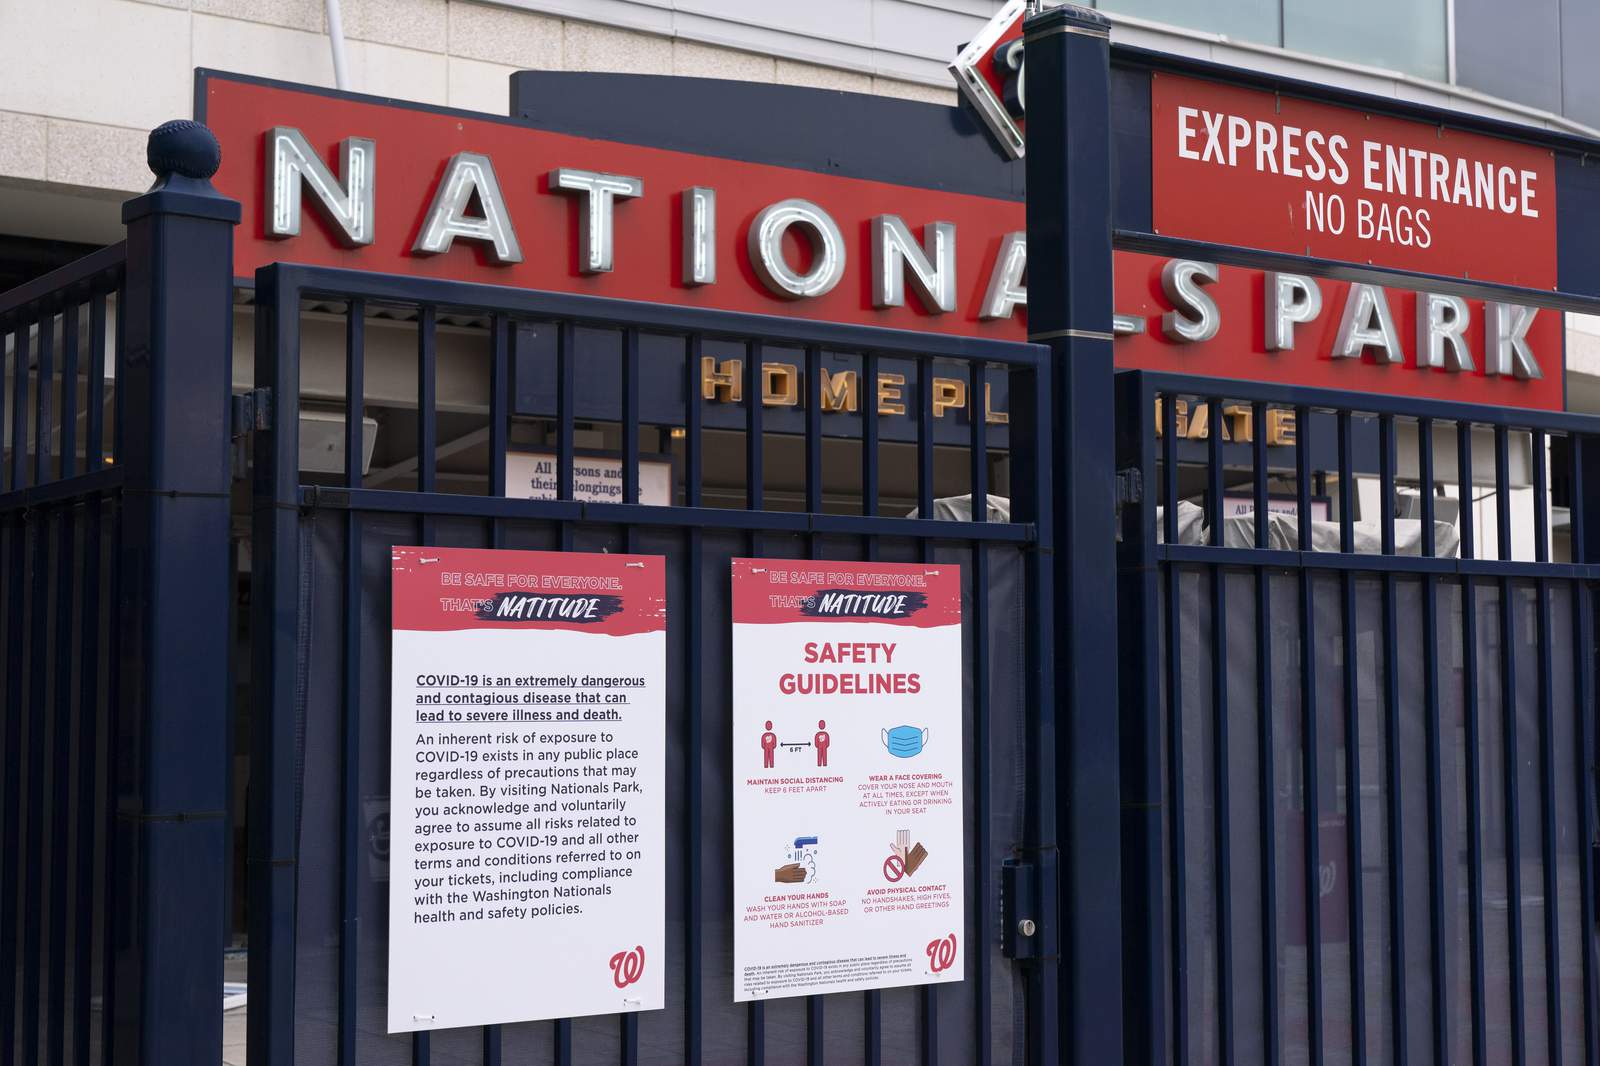 After COVID outbreak, Nats wait to hear about facing Braves